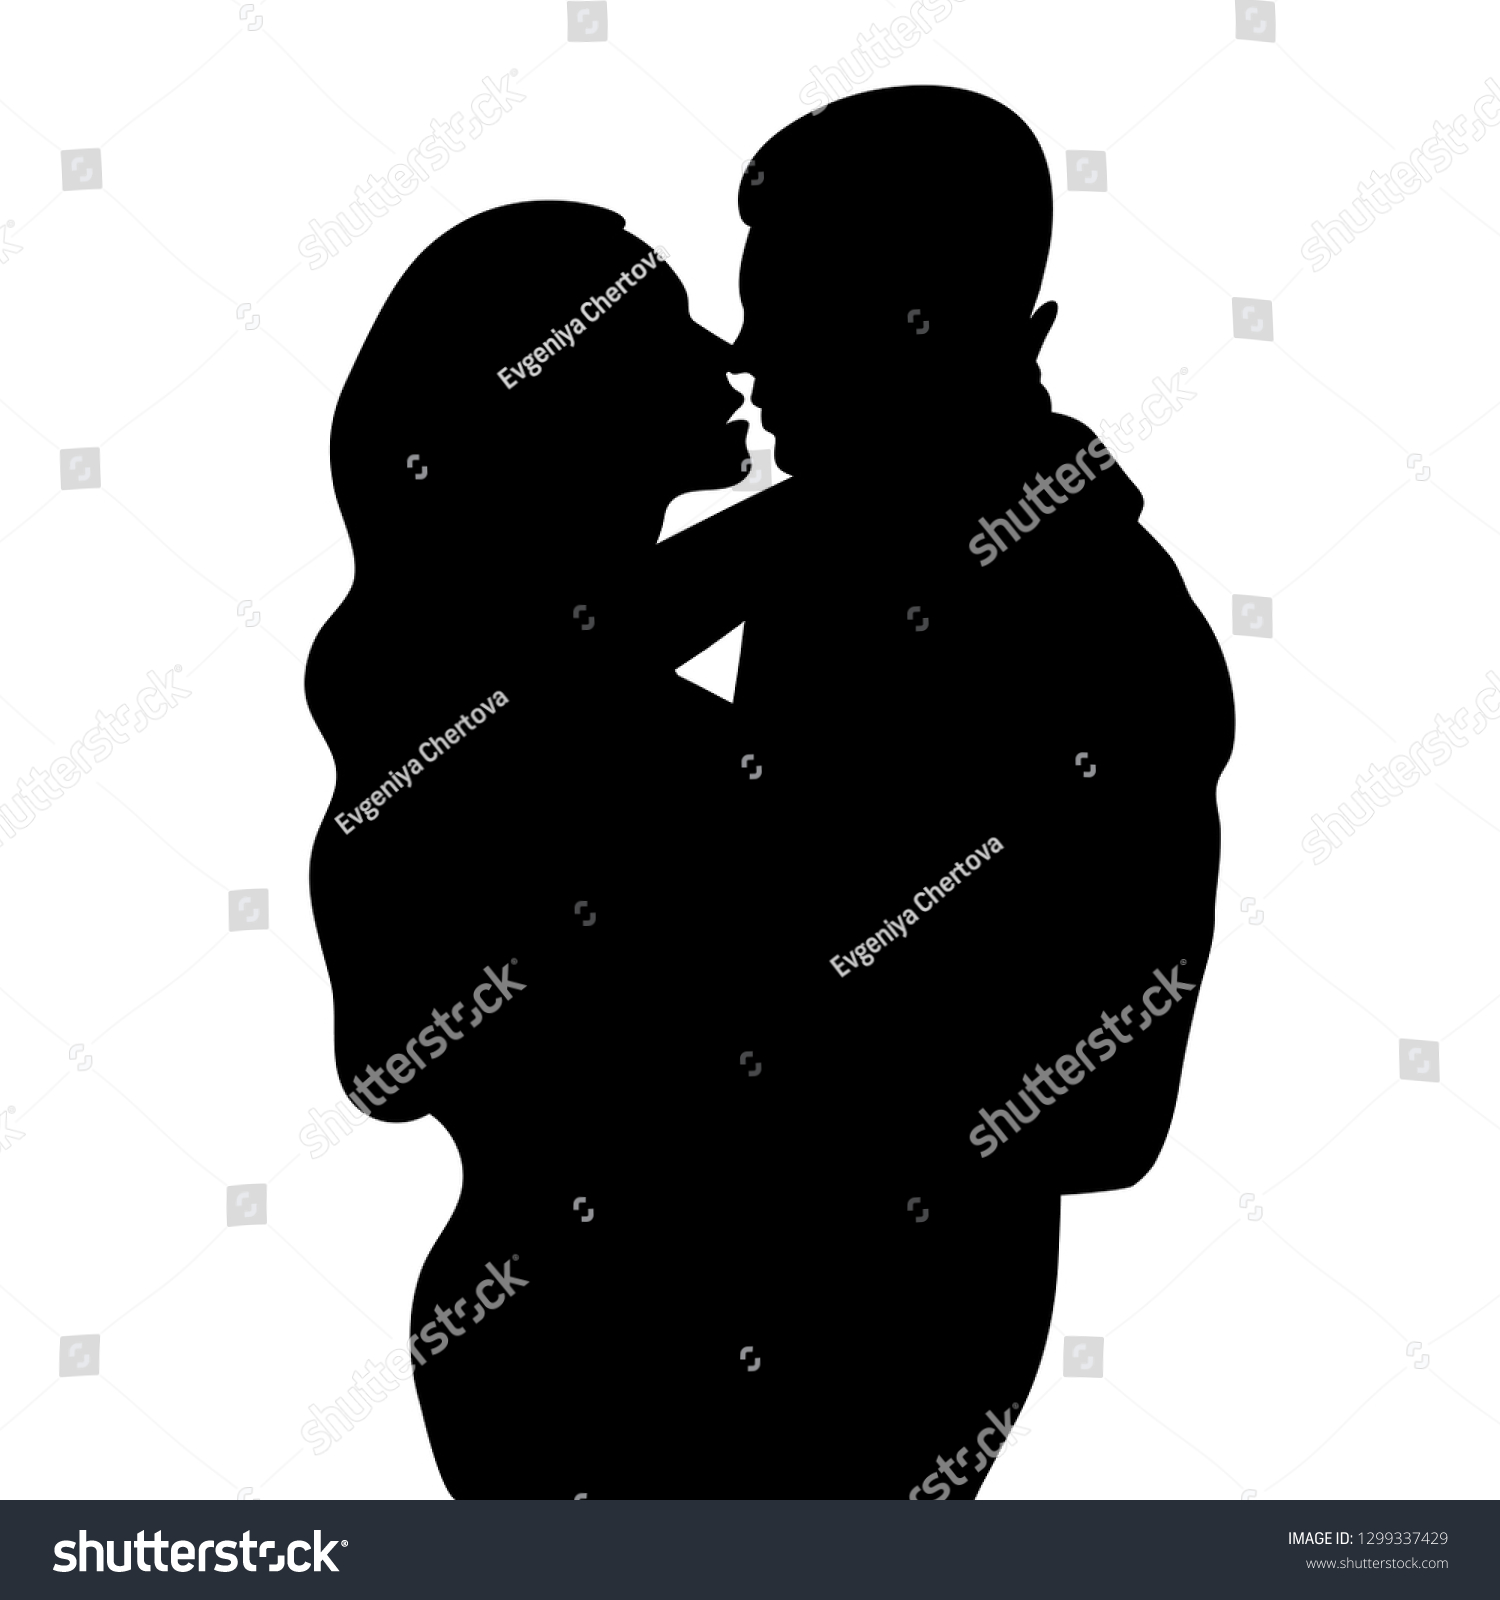 Couple Love Silhouette Lovers Beautiful Man Stock Vector Royalty Free 1299337429 Shutterstock 